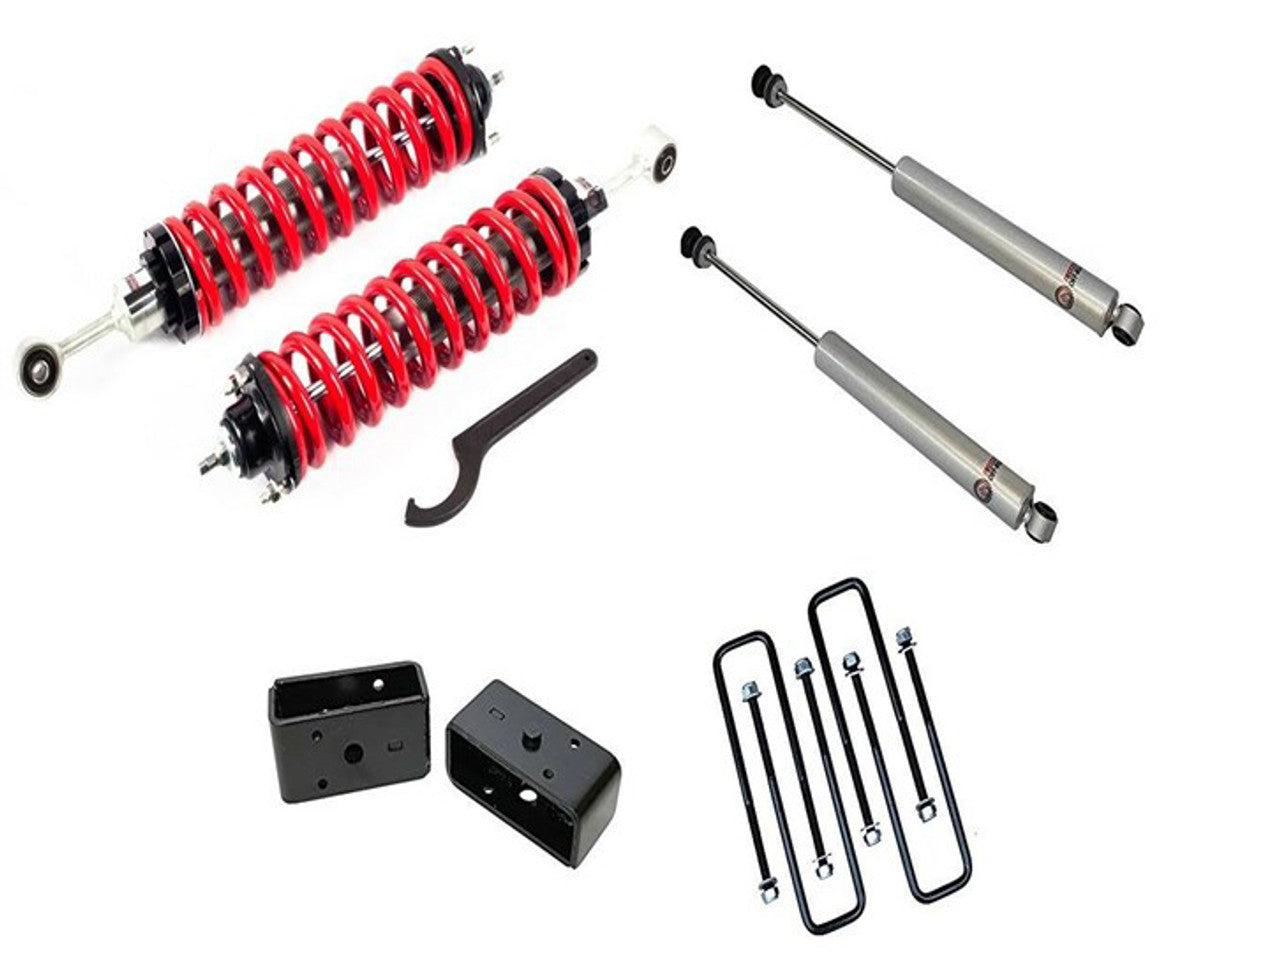 FREEDOM OFF-ROAD LIFT KIT: TOYOTA TUNDRA (1-4" FRONT ADJUSTABLE COILOVER/ REAR 3" LIFT BLOCK)